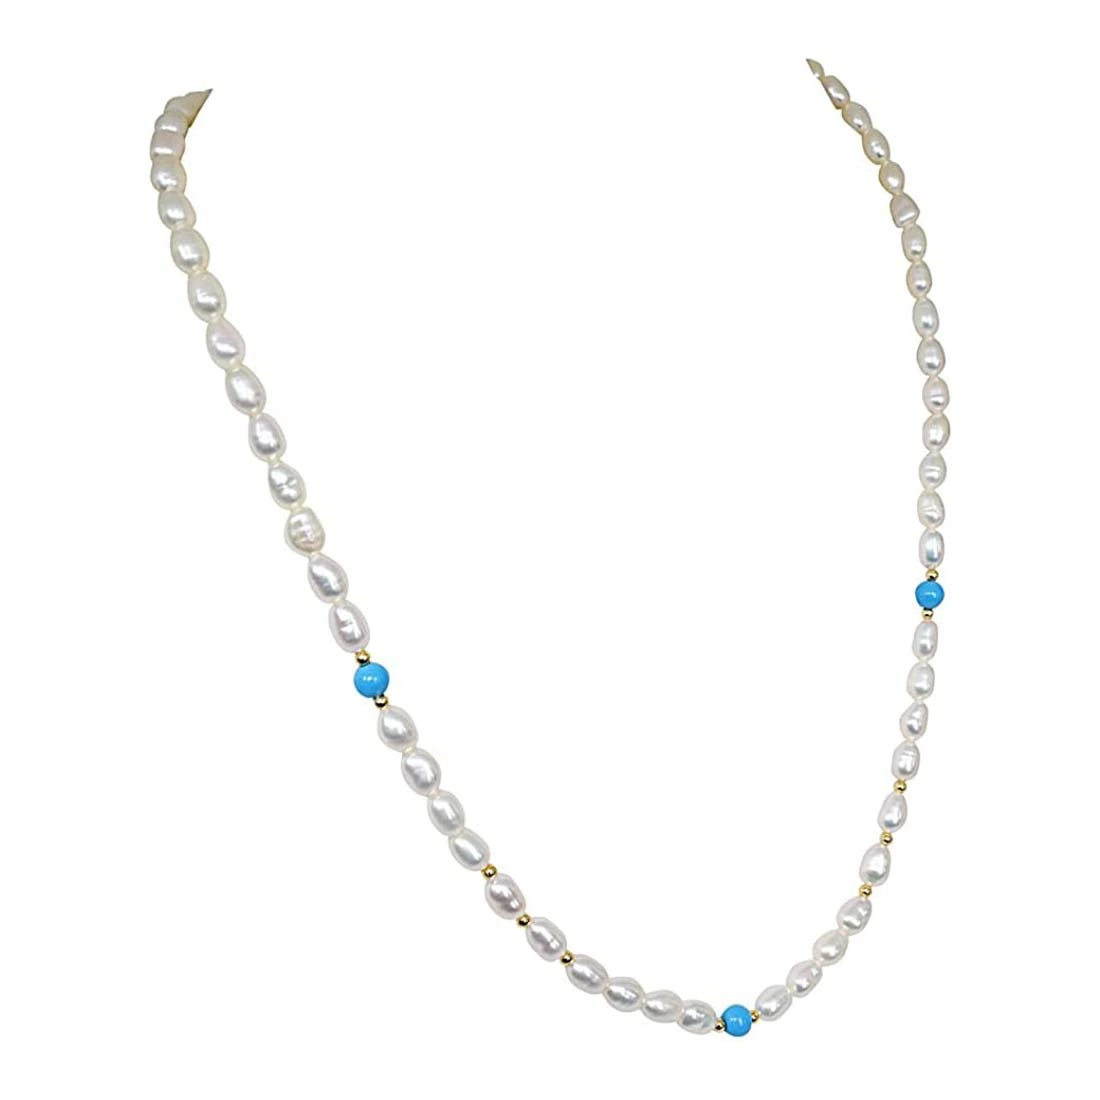 Elan - Single Line Pearl Necklace with Blue turquoise & Gold Plated Beads (SN50)